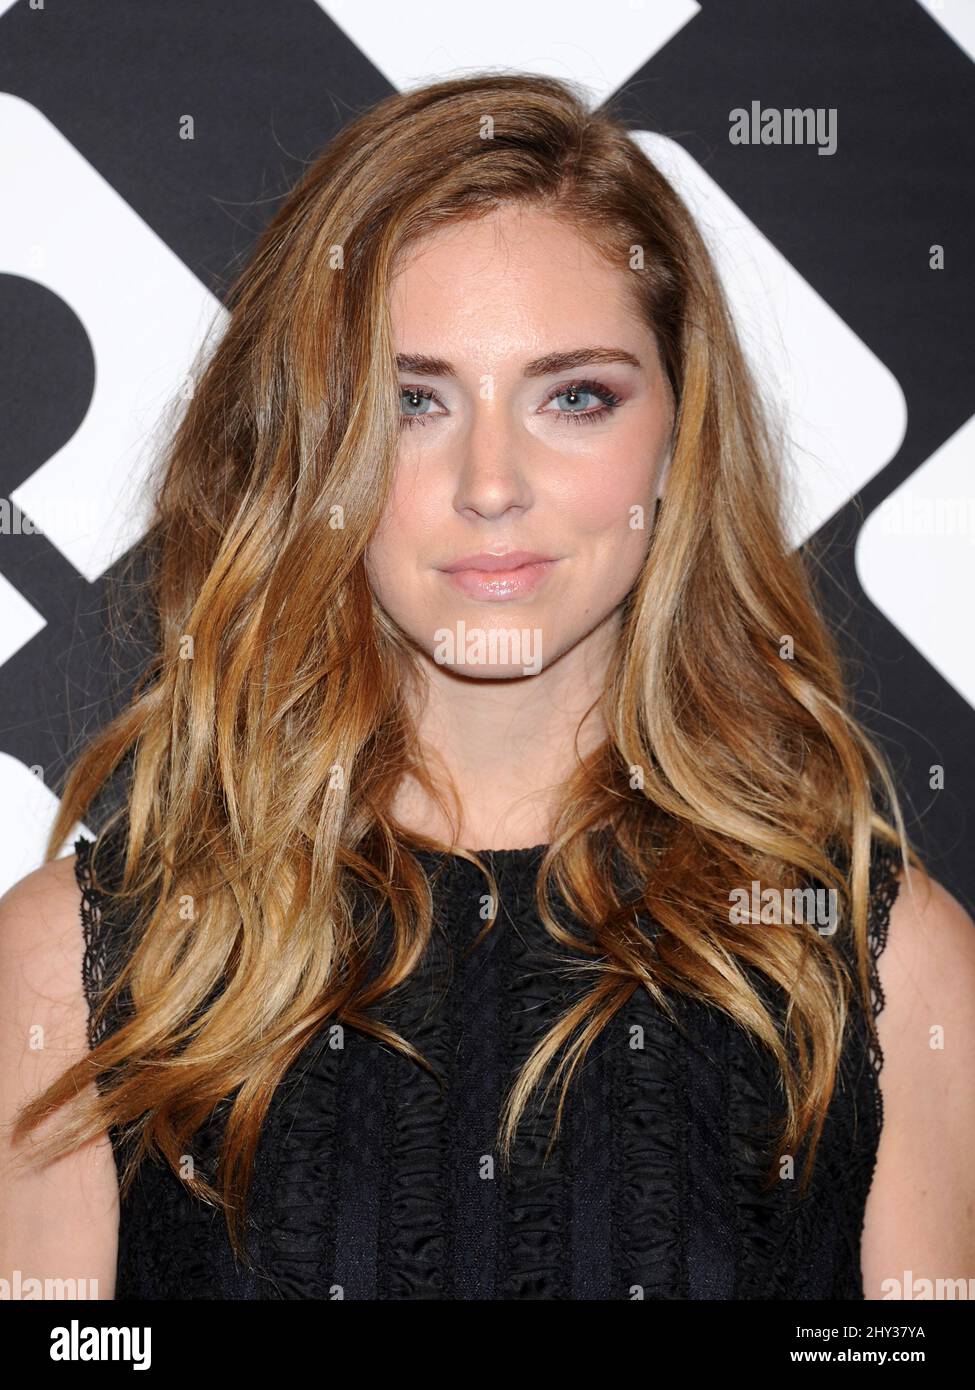 Chiara Ferragni attends the photocall ahead of the Louis Vuitton News  Photo - Getty Images